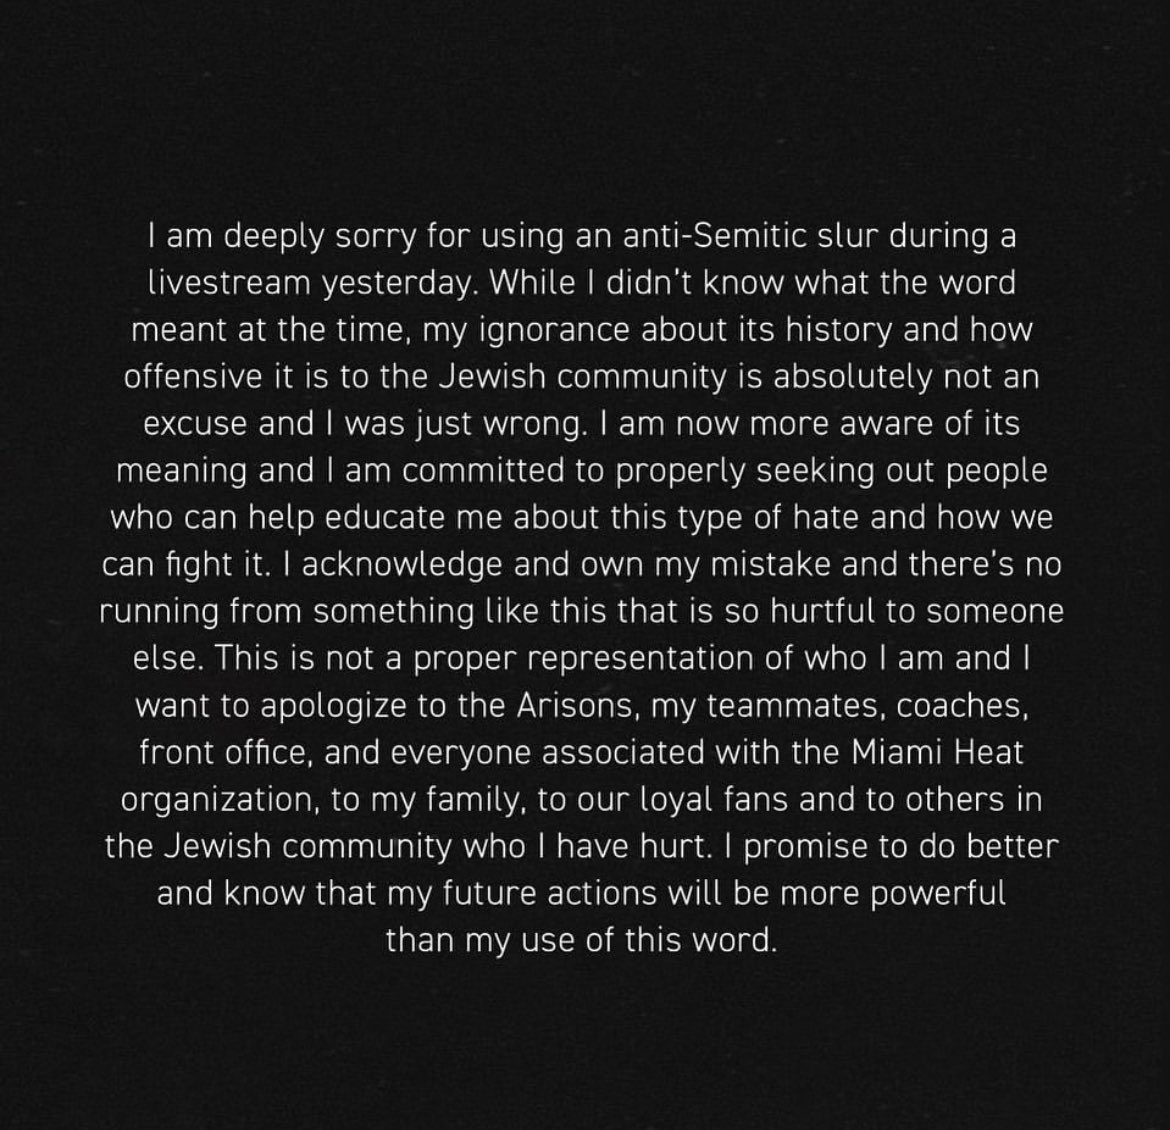 Meyers Leonard Anti-Semitic Slur - bełżec, lublin voivodeship - I am deeply sorry for using an antiSemitic slur during a livestream yesterday. While I didn't know what the word meant at the time, my ignorance about its history and how offensive it is to t